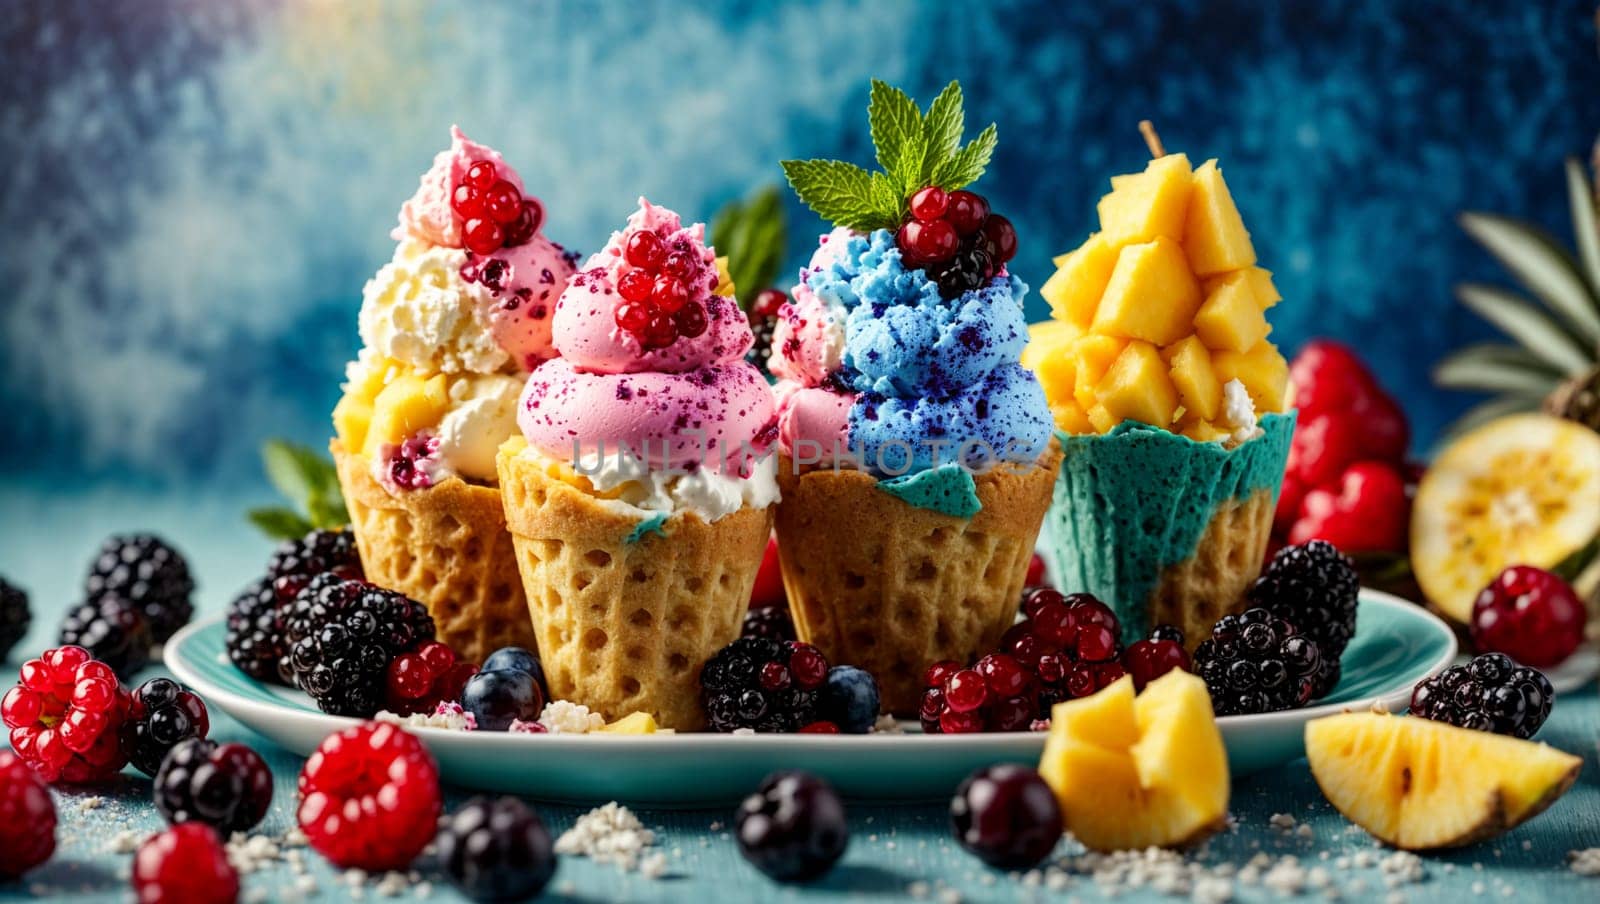 multi-colored ice cream with frozen berries and mango slices by Севостьянов